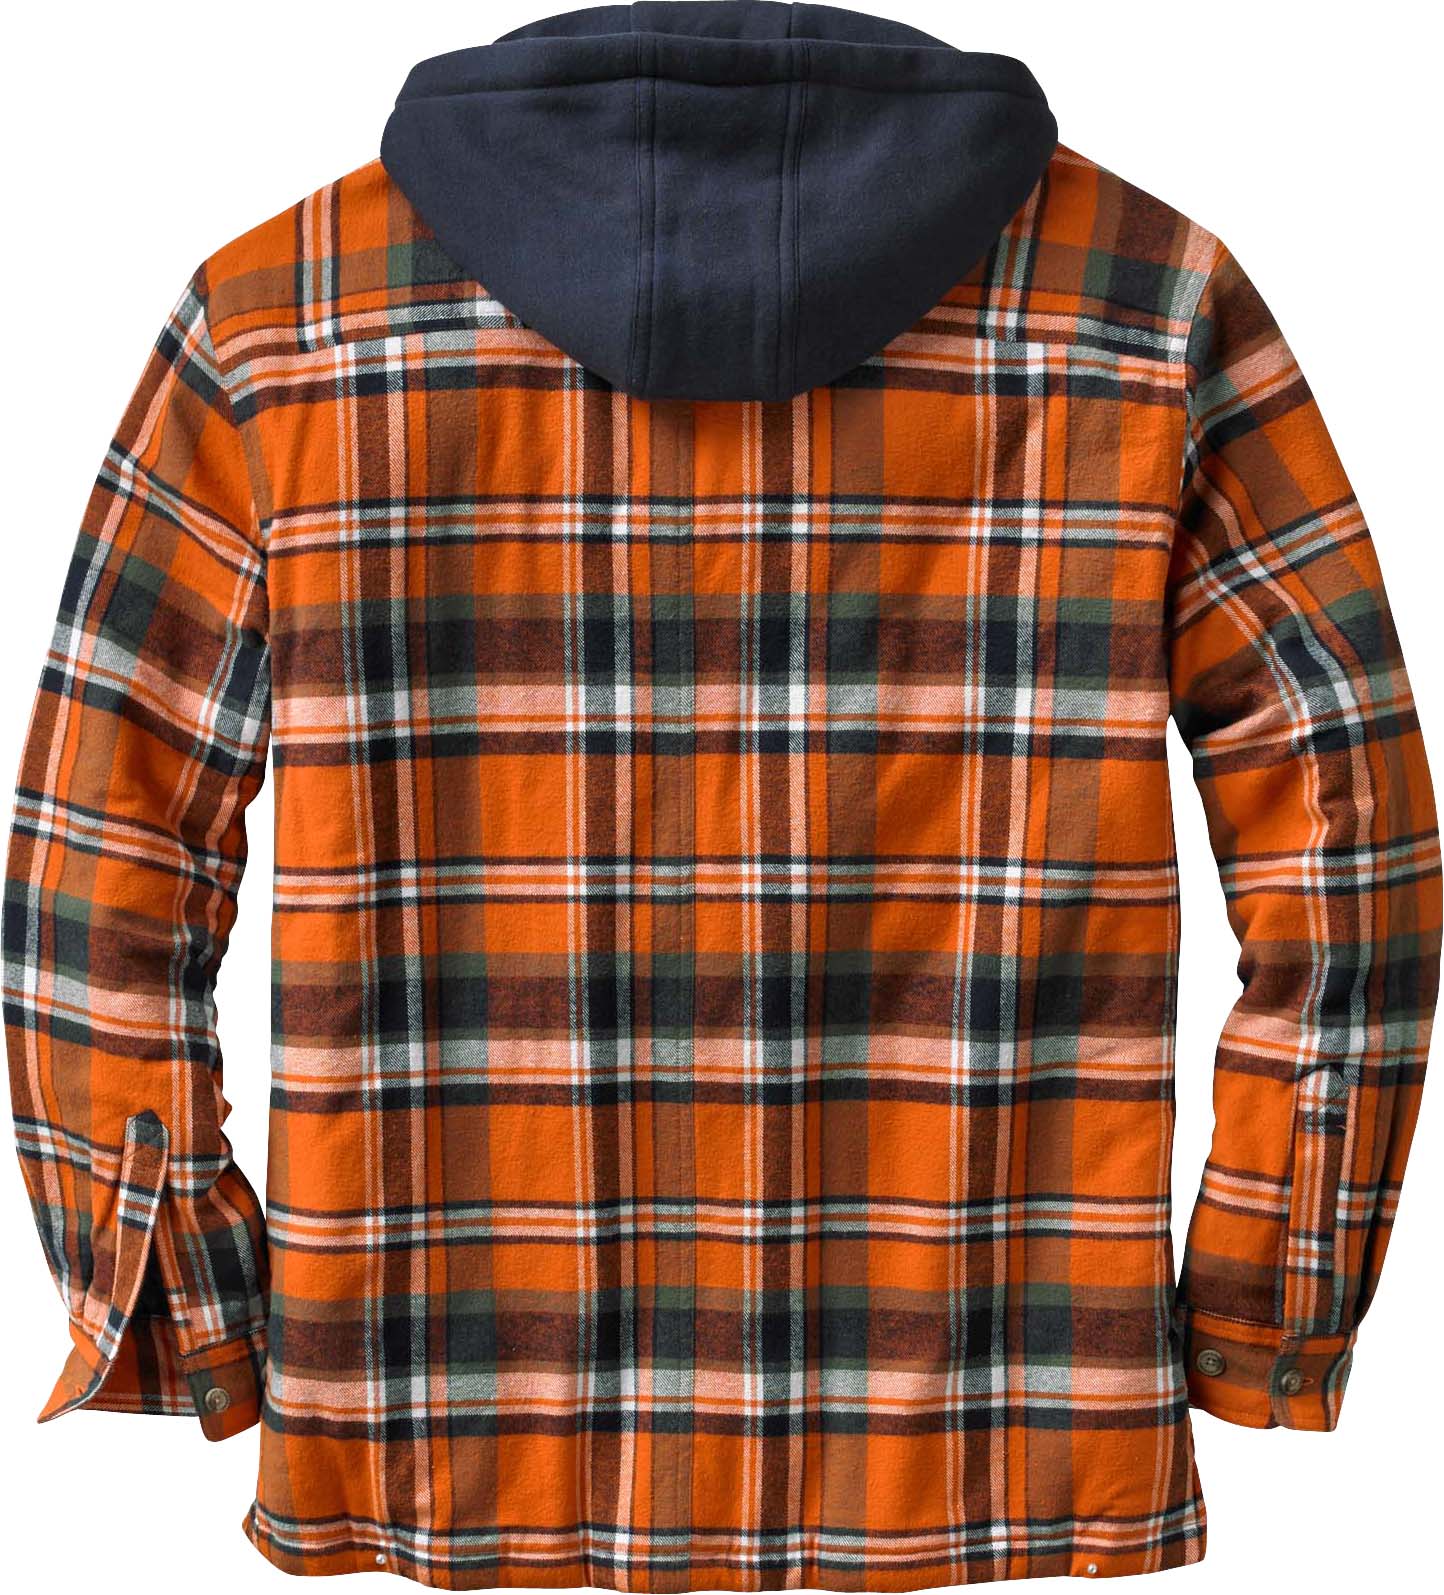 flannel jacket with hoodie